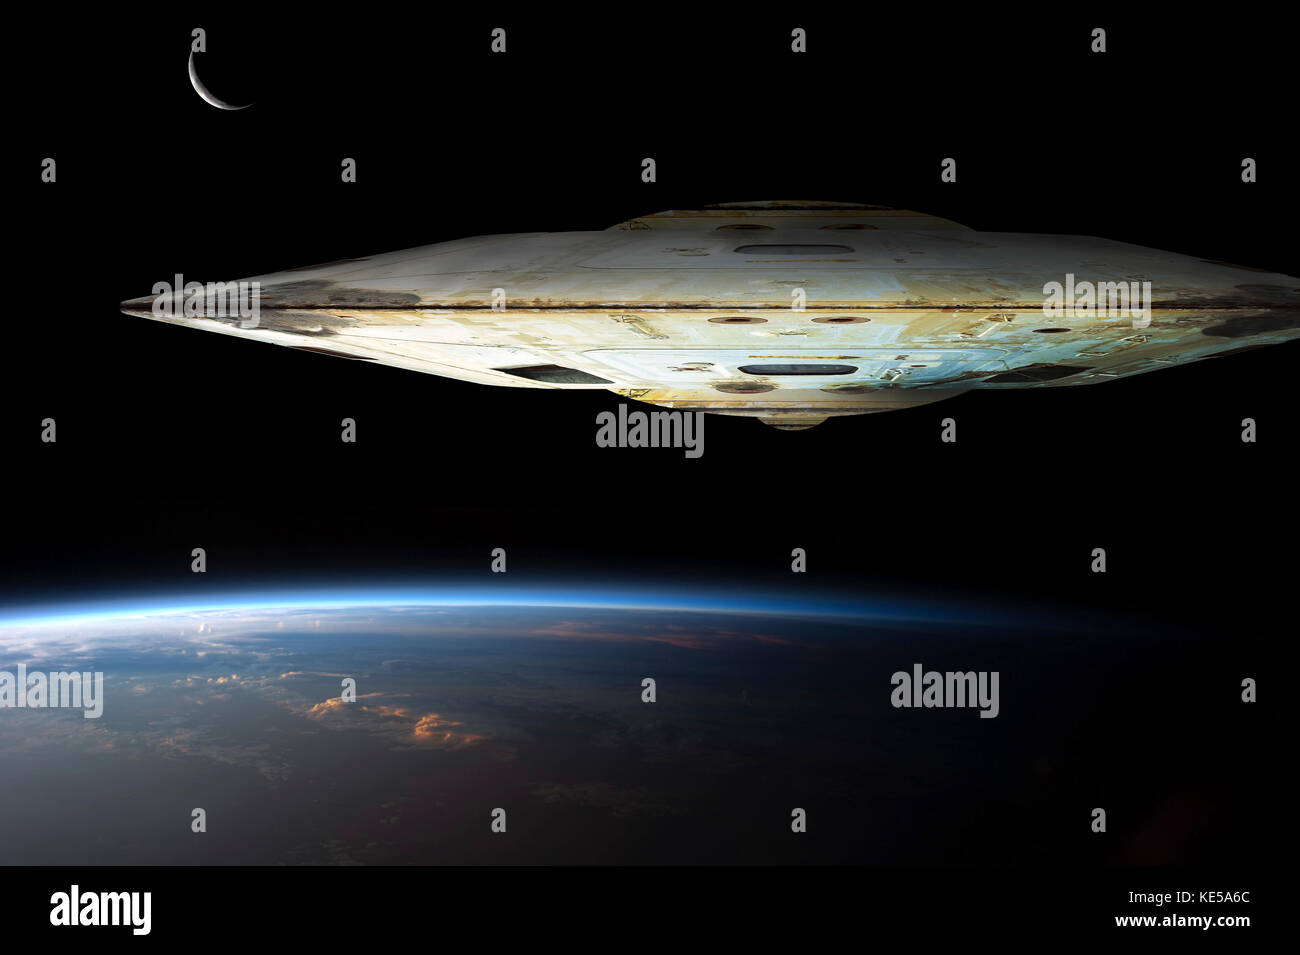 A massive spaceship known as mothership takes position over Earth for